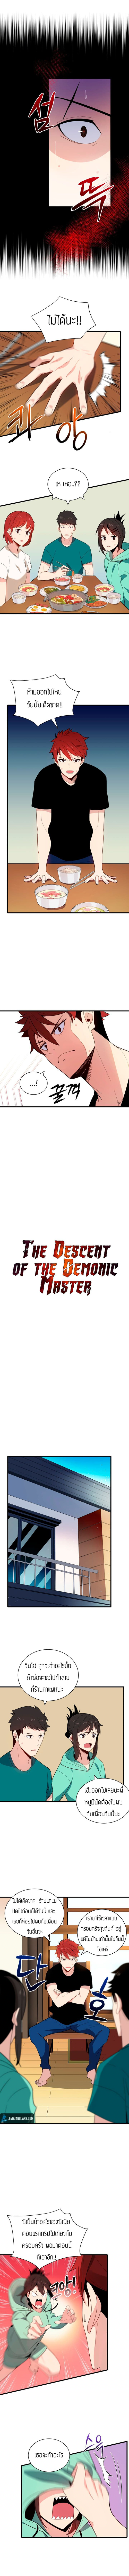 The Descent of the Demonic Master17 (4)